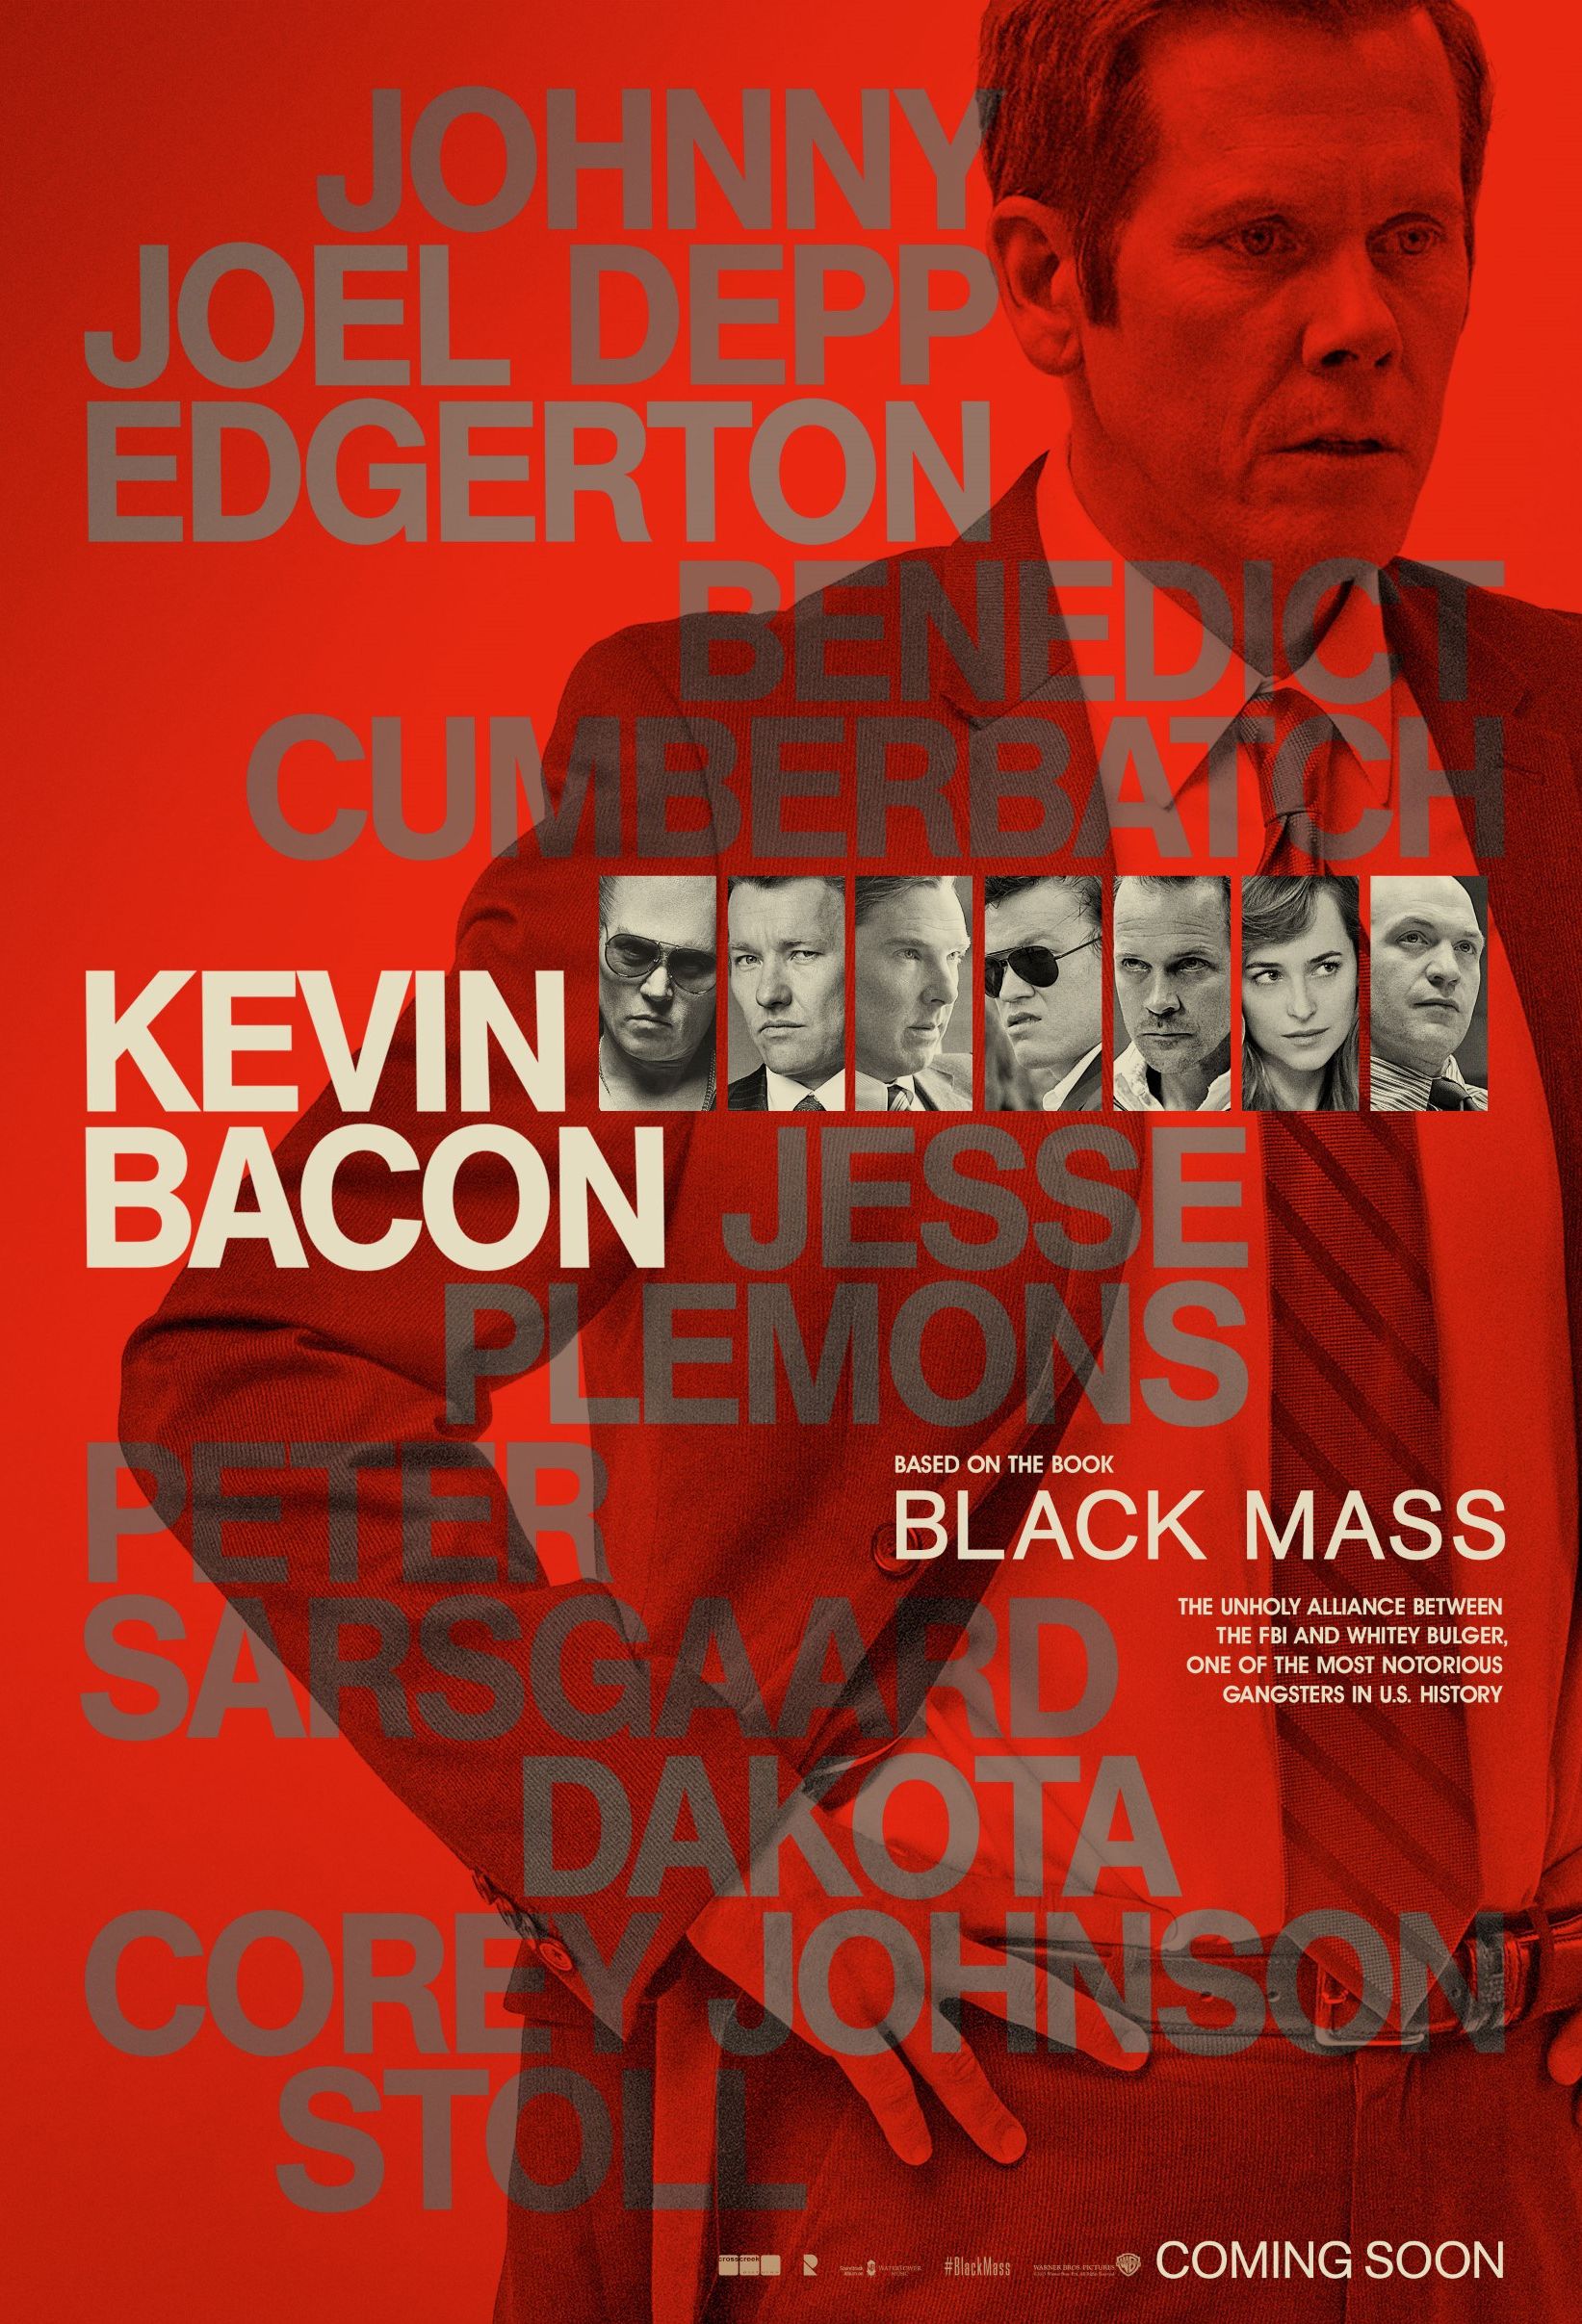 Kevin Bacon, Black Mass Poster